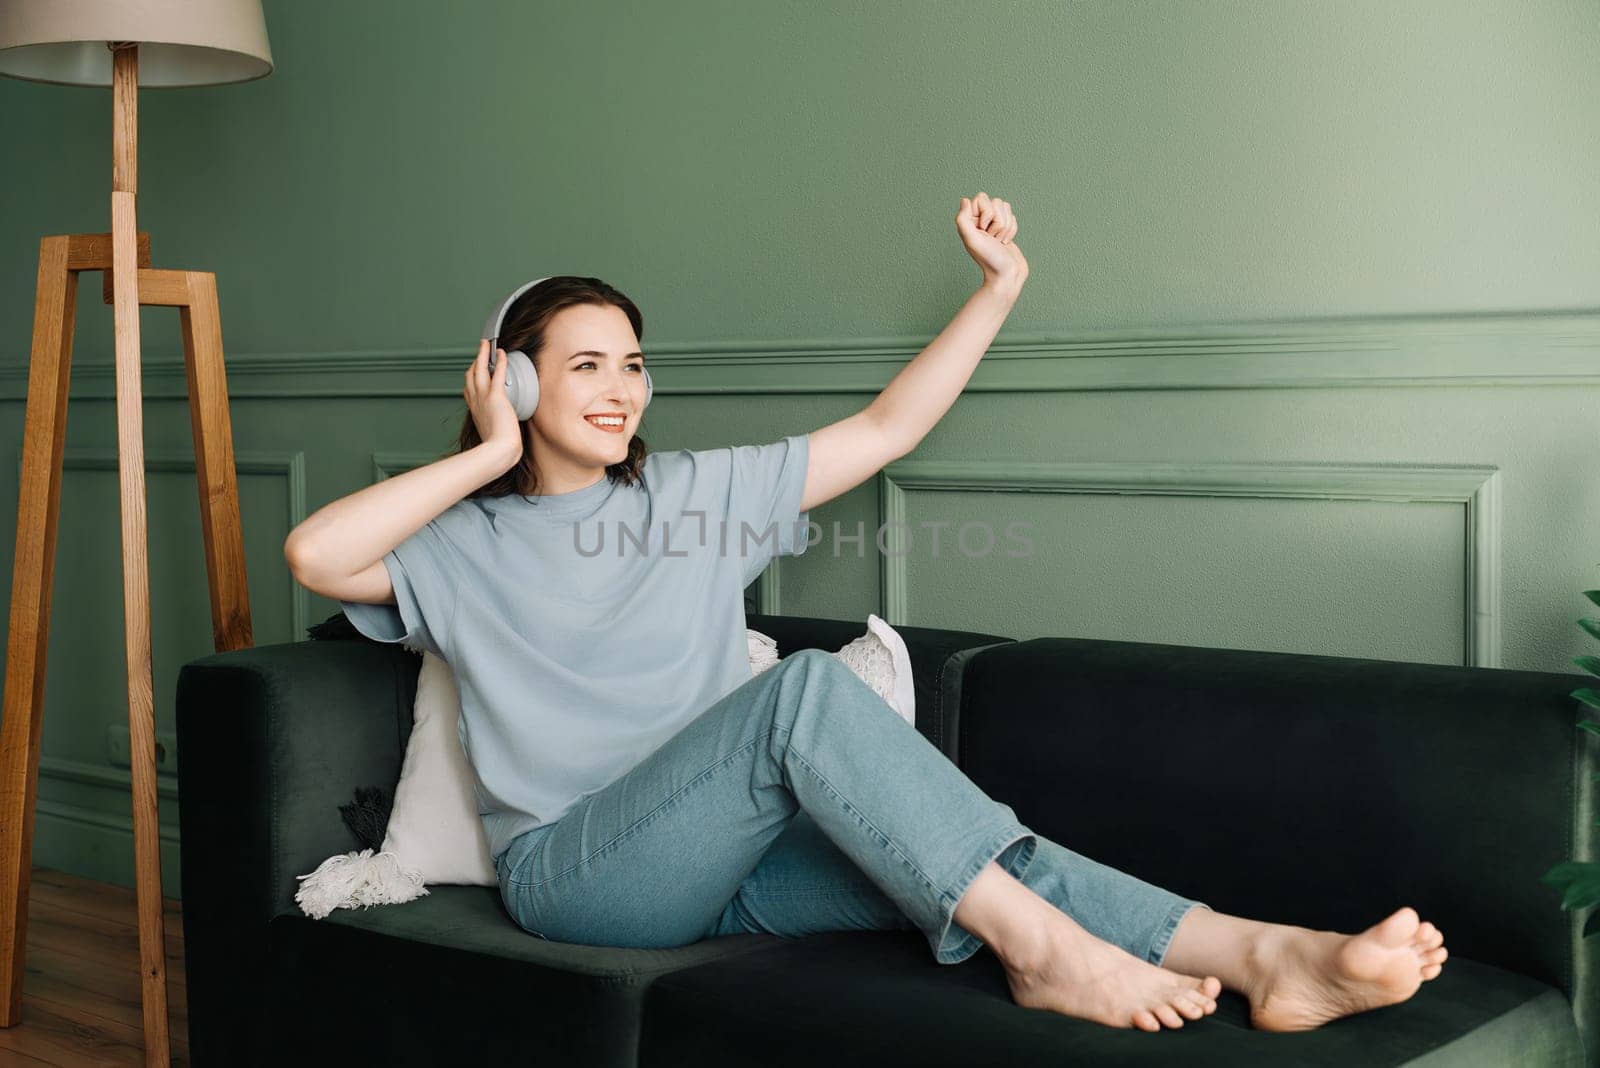 Happy young woman in wireless headphones listening to music while dancing. Rhythmic Euphoria. Joyful Woman Grooving to Music in Wireless Headphones. Musical Elation. Dance of Joy.